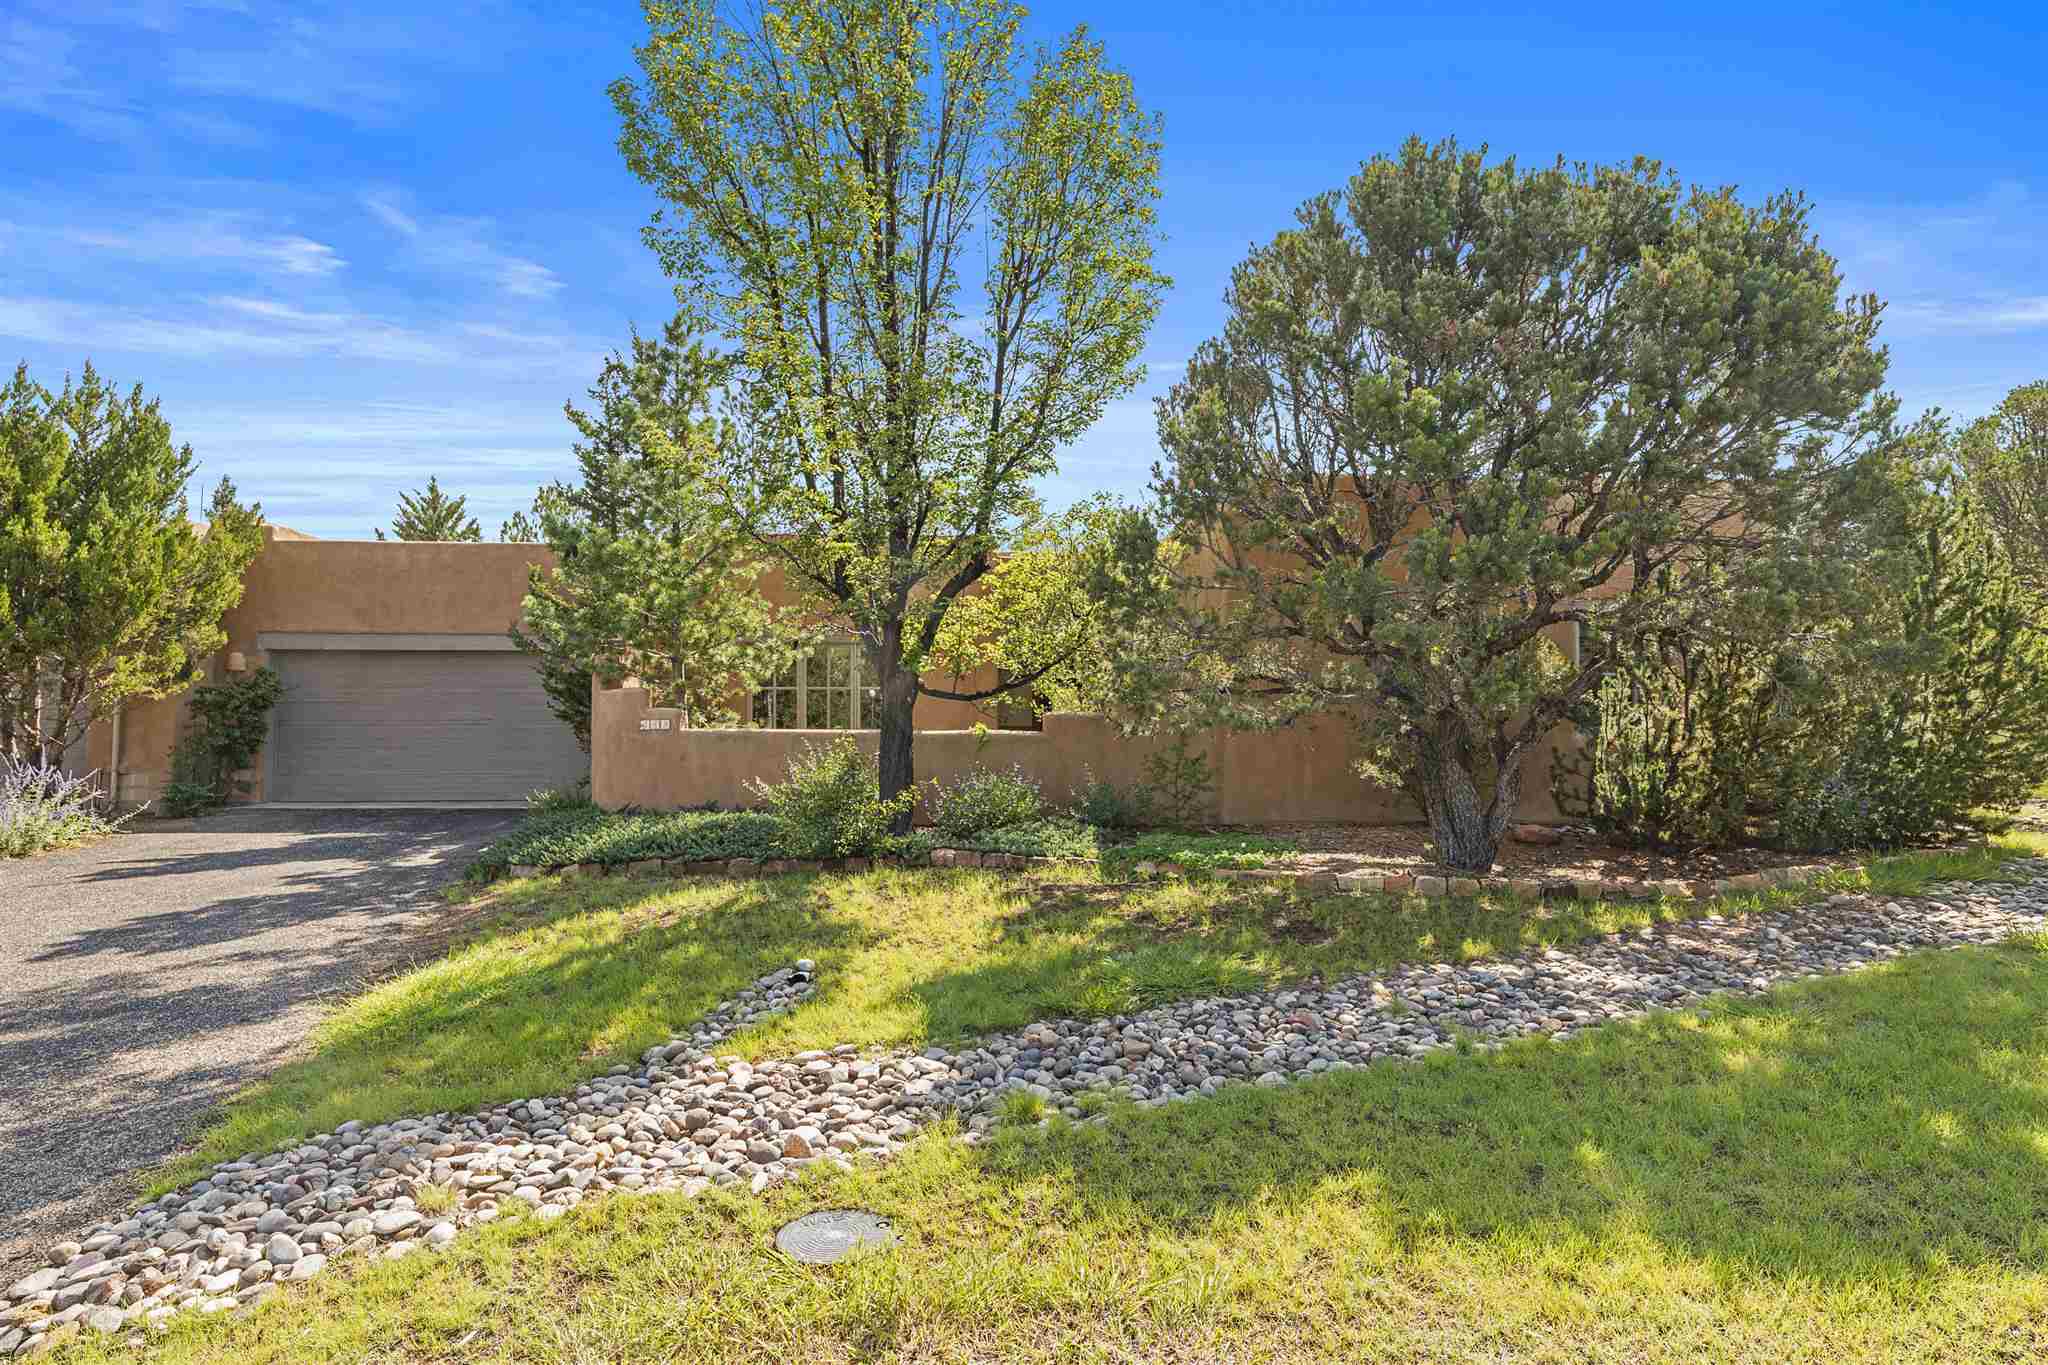 3101 Old Pecos Trail Unit 689 689, Santa Fe, New Mexico 87505, 2 Bedrooms Bedrooms, ,2 BathroomsBathrooms,Residential,For Sale,3101 Old Pecos Trail Unit 689 689,202103520